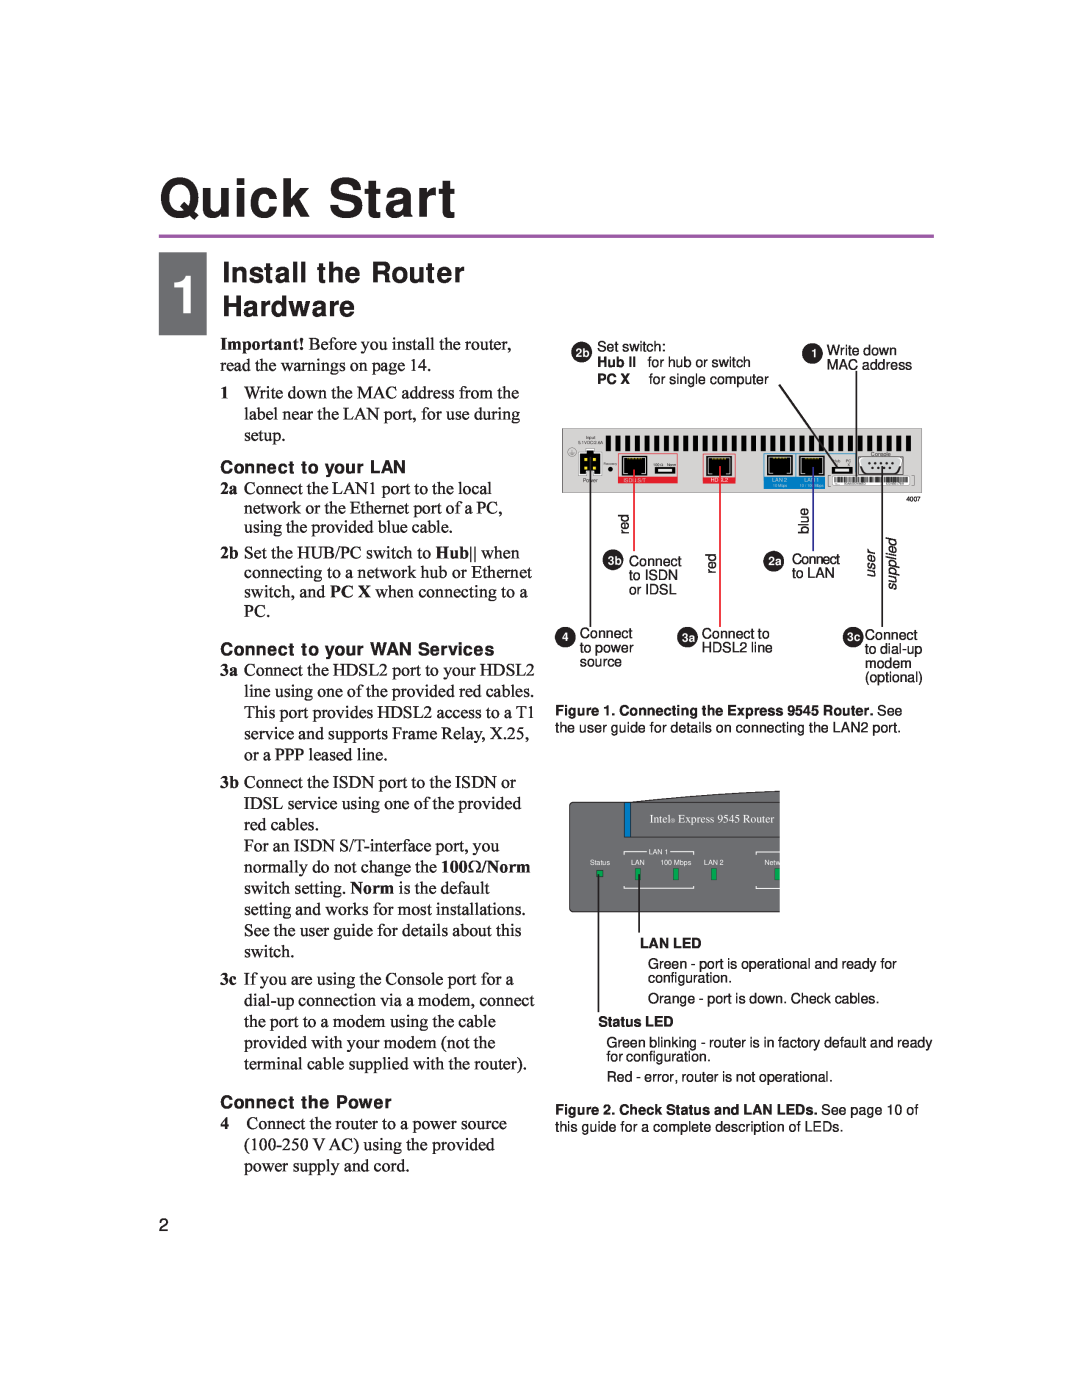 Intel 9545 quick start Quick Start, Install the Router 1 Hardware, Connect to your LAN, Connect to your WAN Services 